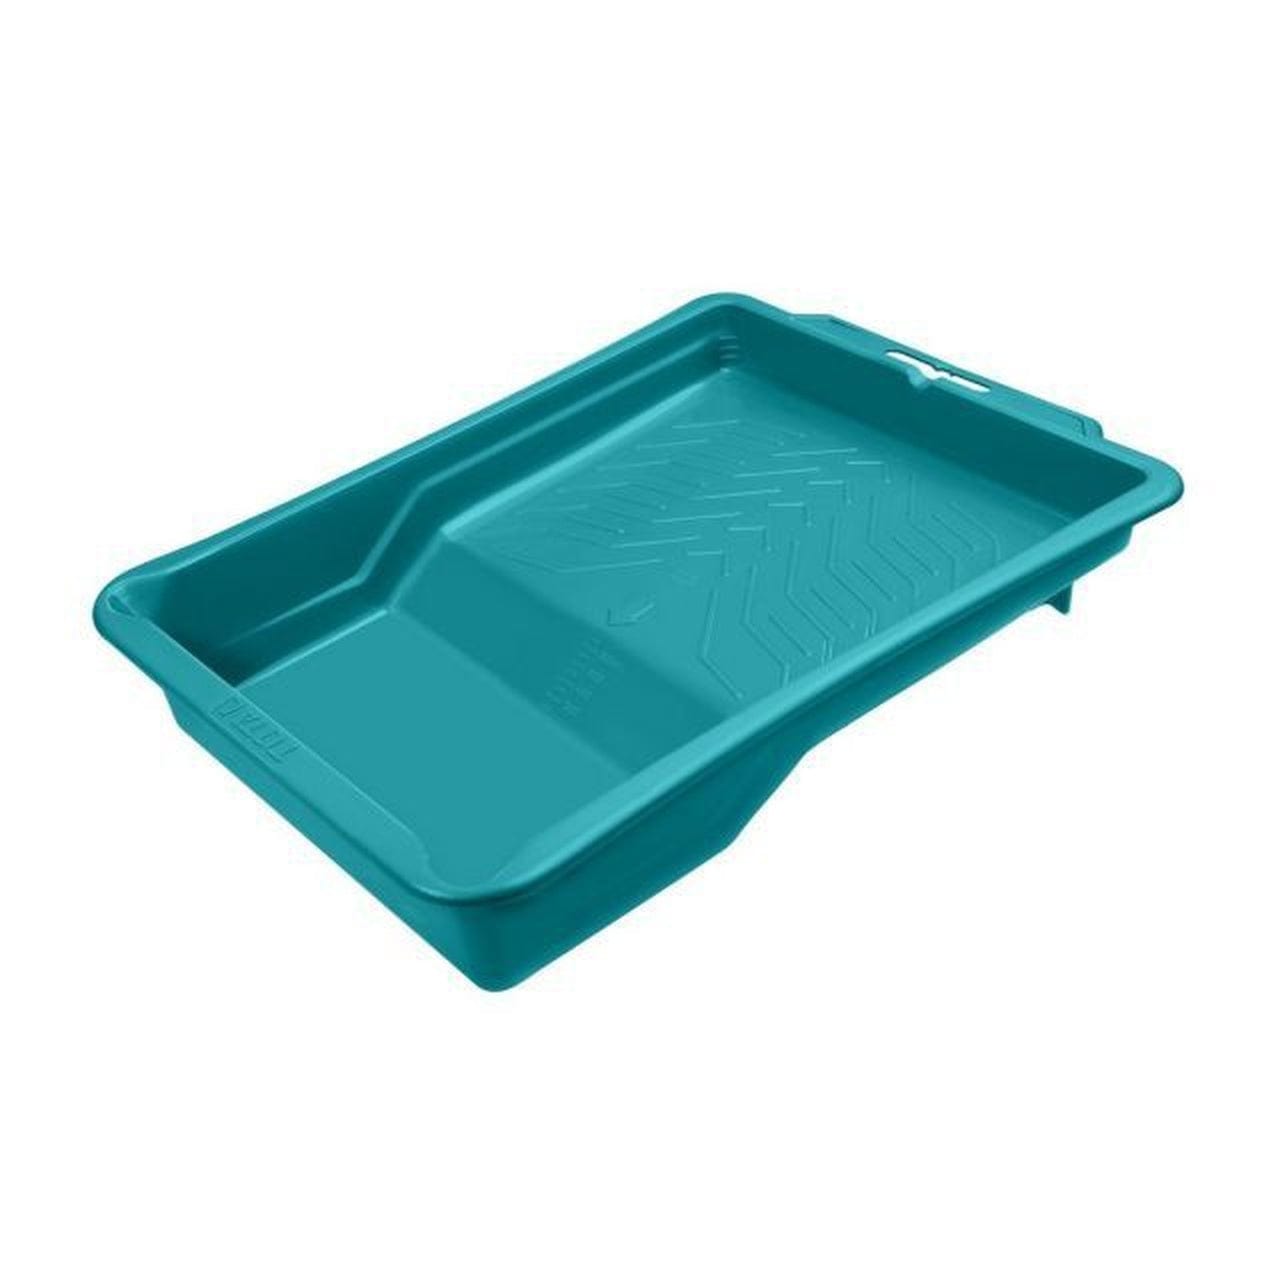 Total Paint Tray - TCHPTT082551 | Supply Master | Accra, Ghana Paint Tools & Equipment Buy Tools hardware Building materials